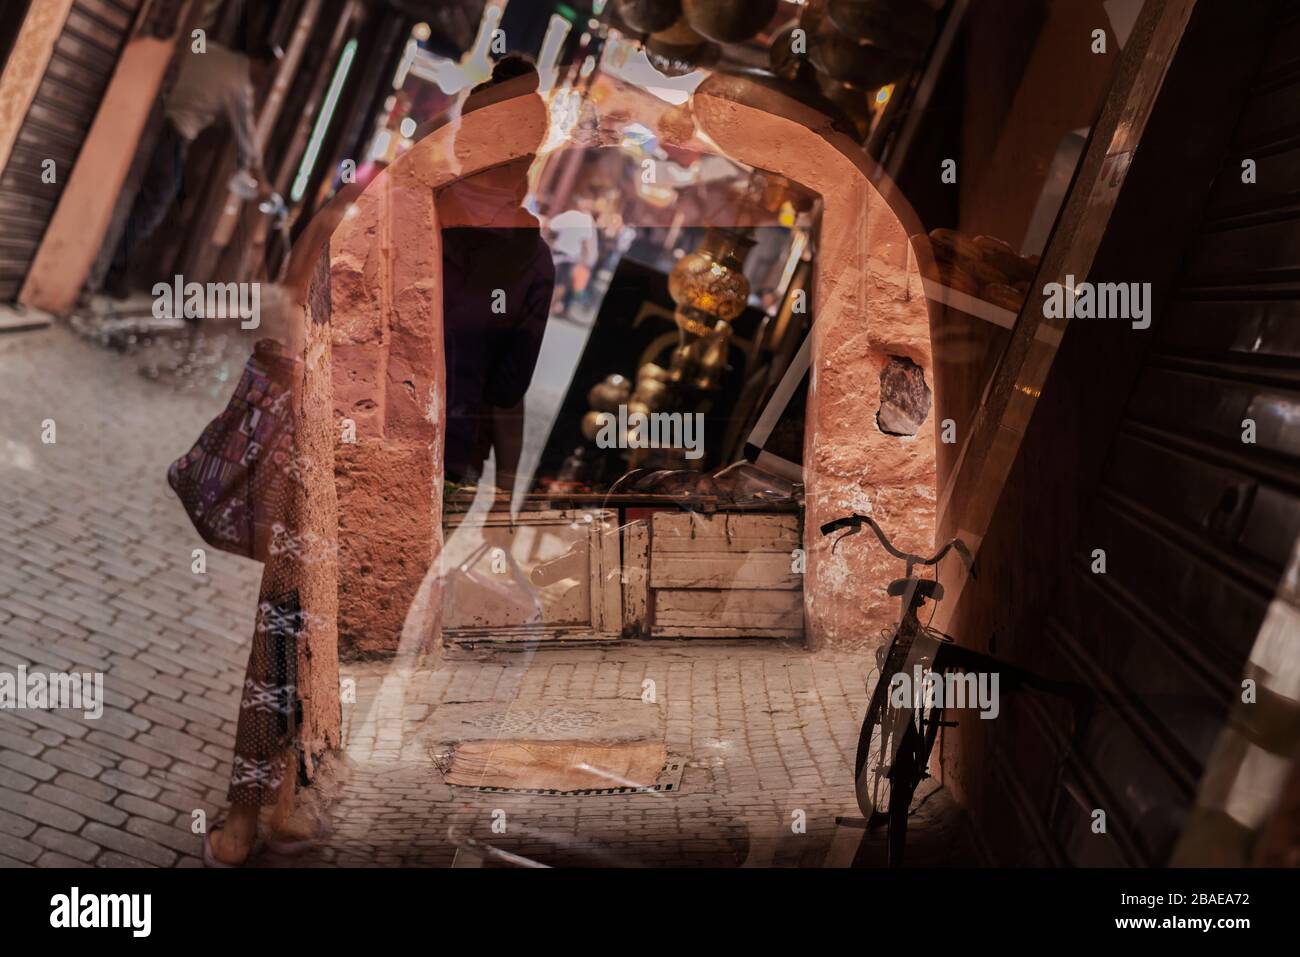 Busy scene inside the medina (old town), showing a woman with shopping bags walking, a lamp shop, and a bicycle leaning against a closed shop, Novembe Stock Photo